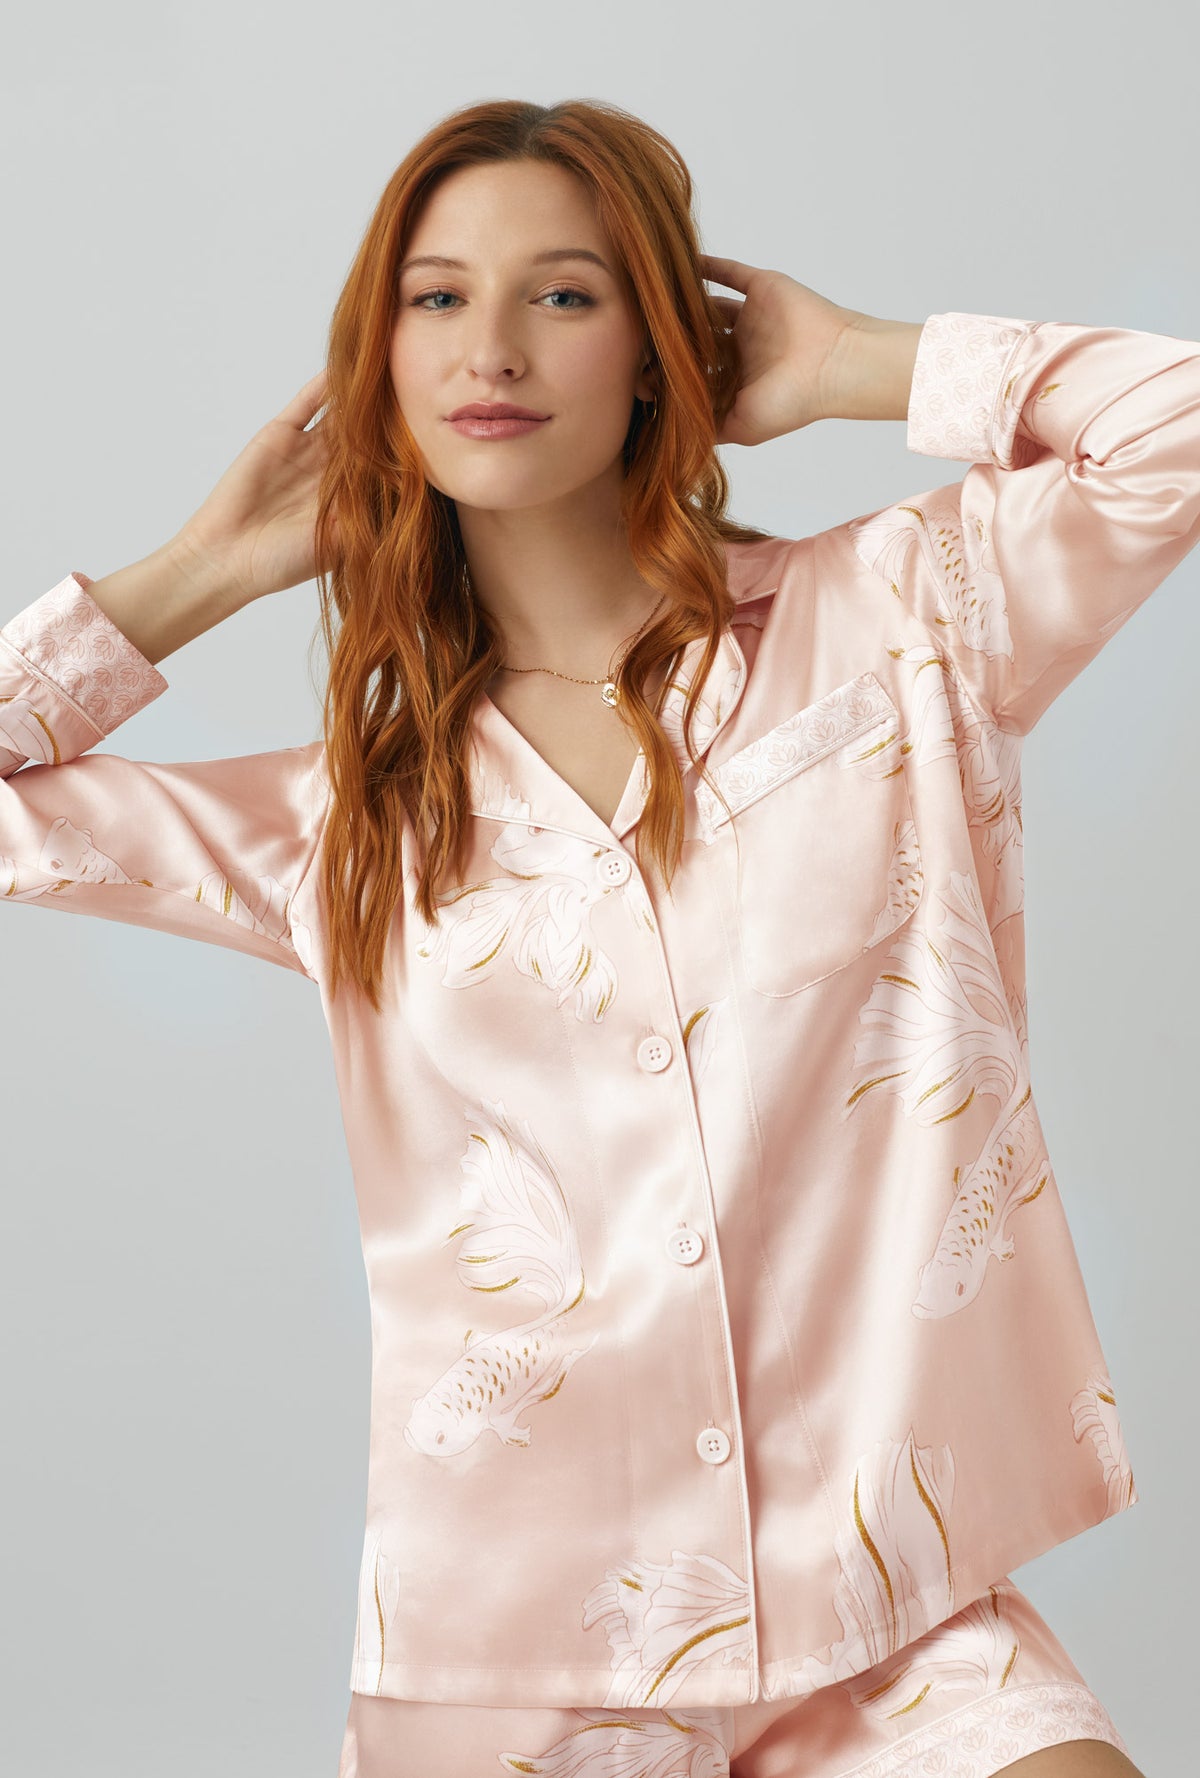 A lady wearing Long Sleeve Classic Washable Silk Satin Short PJ Set with koi pond print